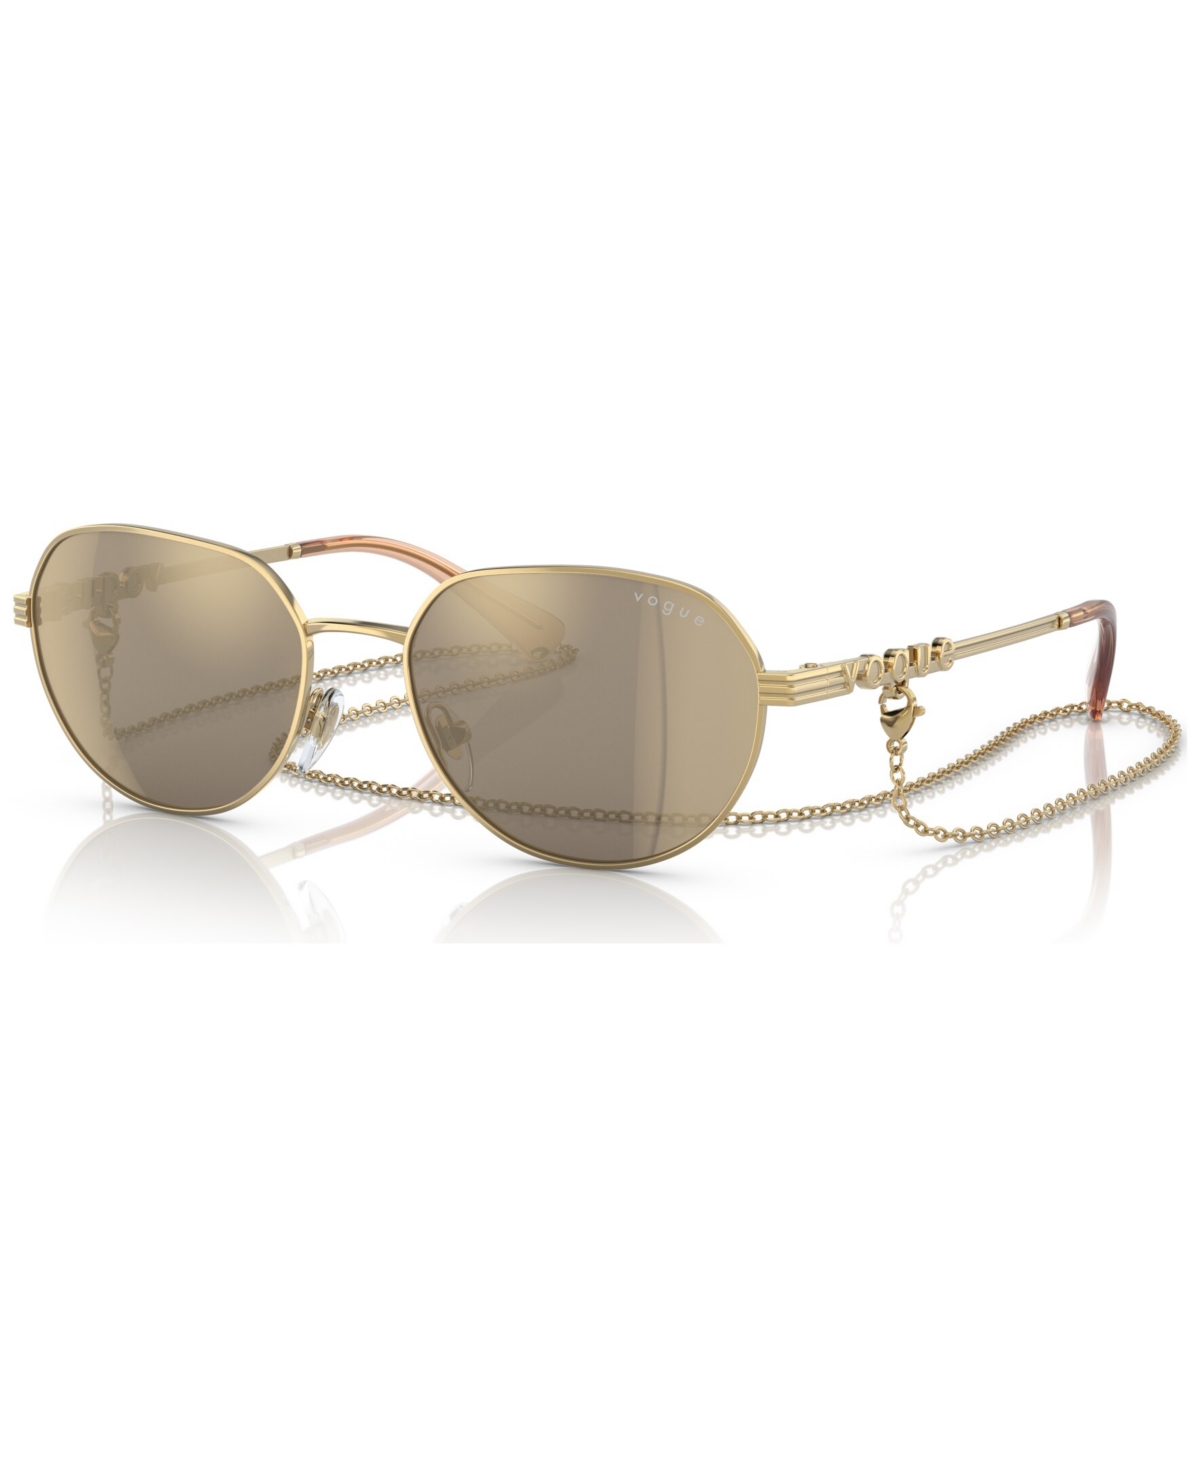 Vogue Women's Sunglasses 0vo4254s 280, Created For Macy's In Gold-tone